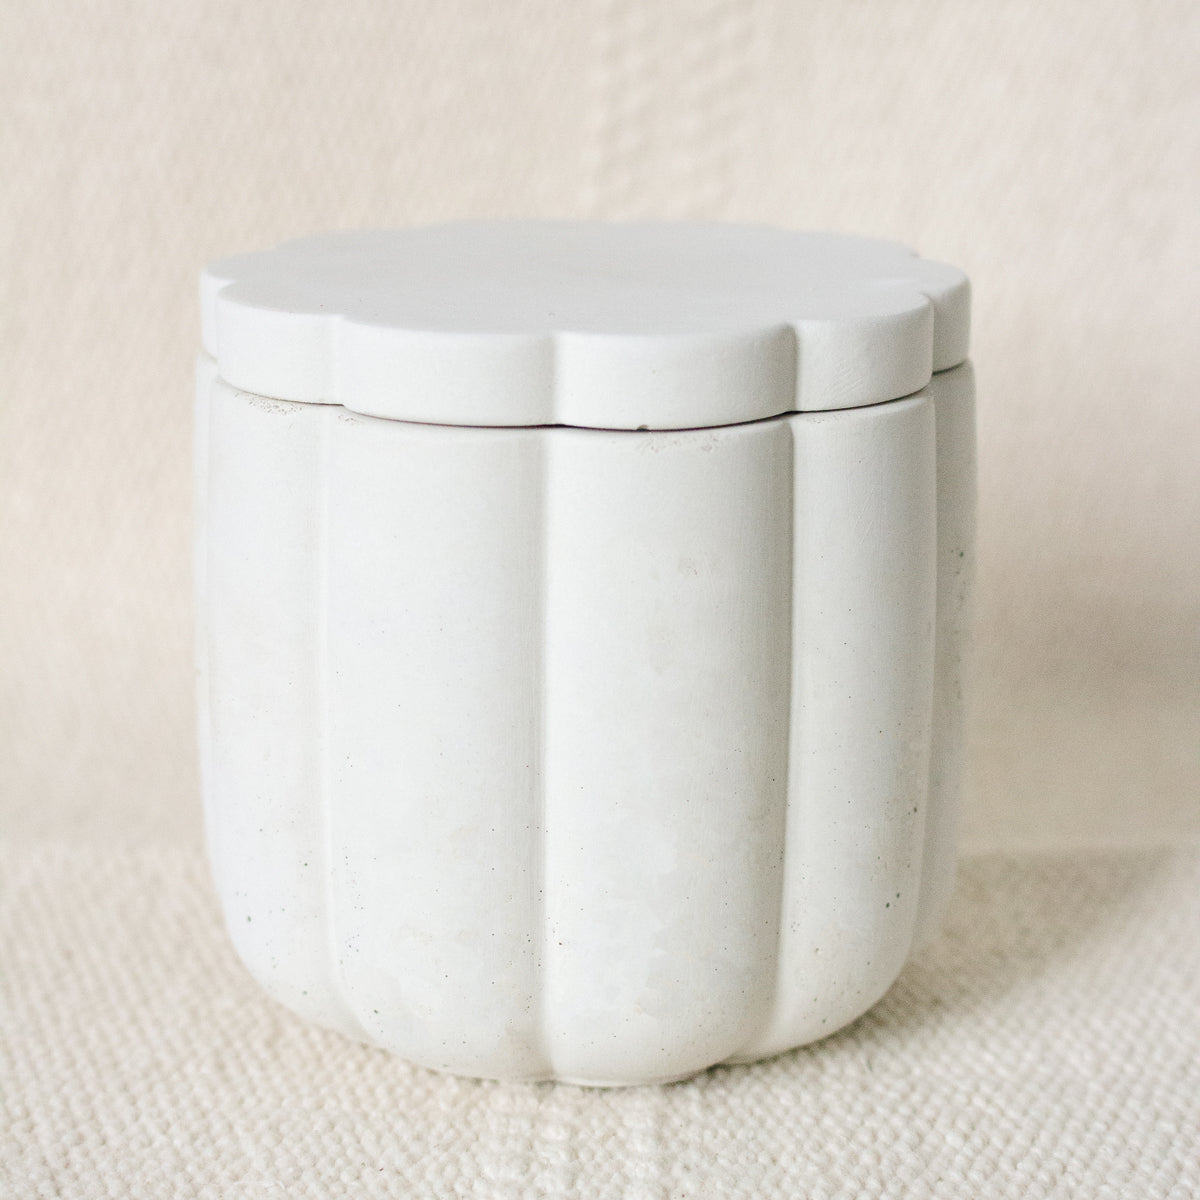 6oz Ribbed Concrete Pot with Lid, Wholesale Candles, Candle Making